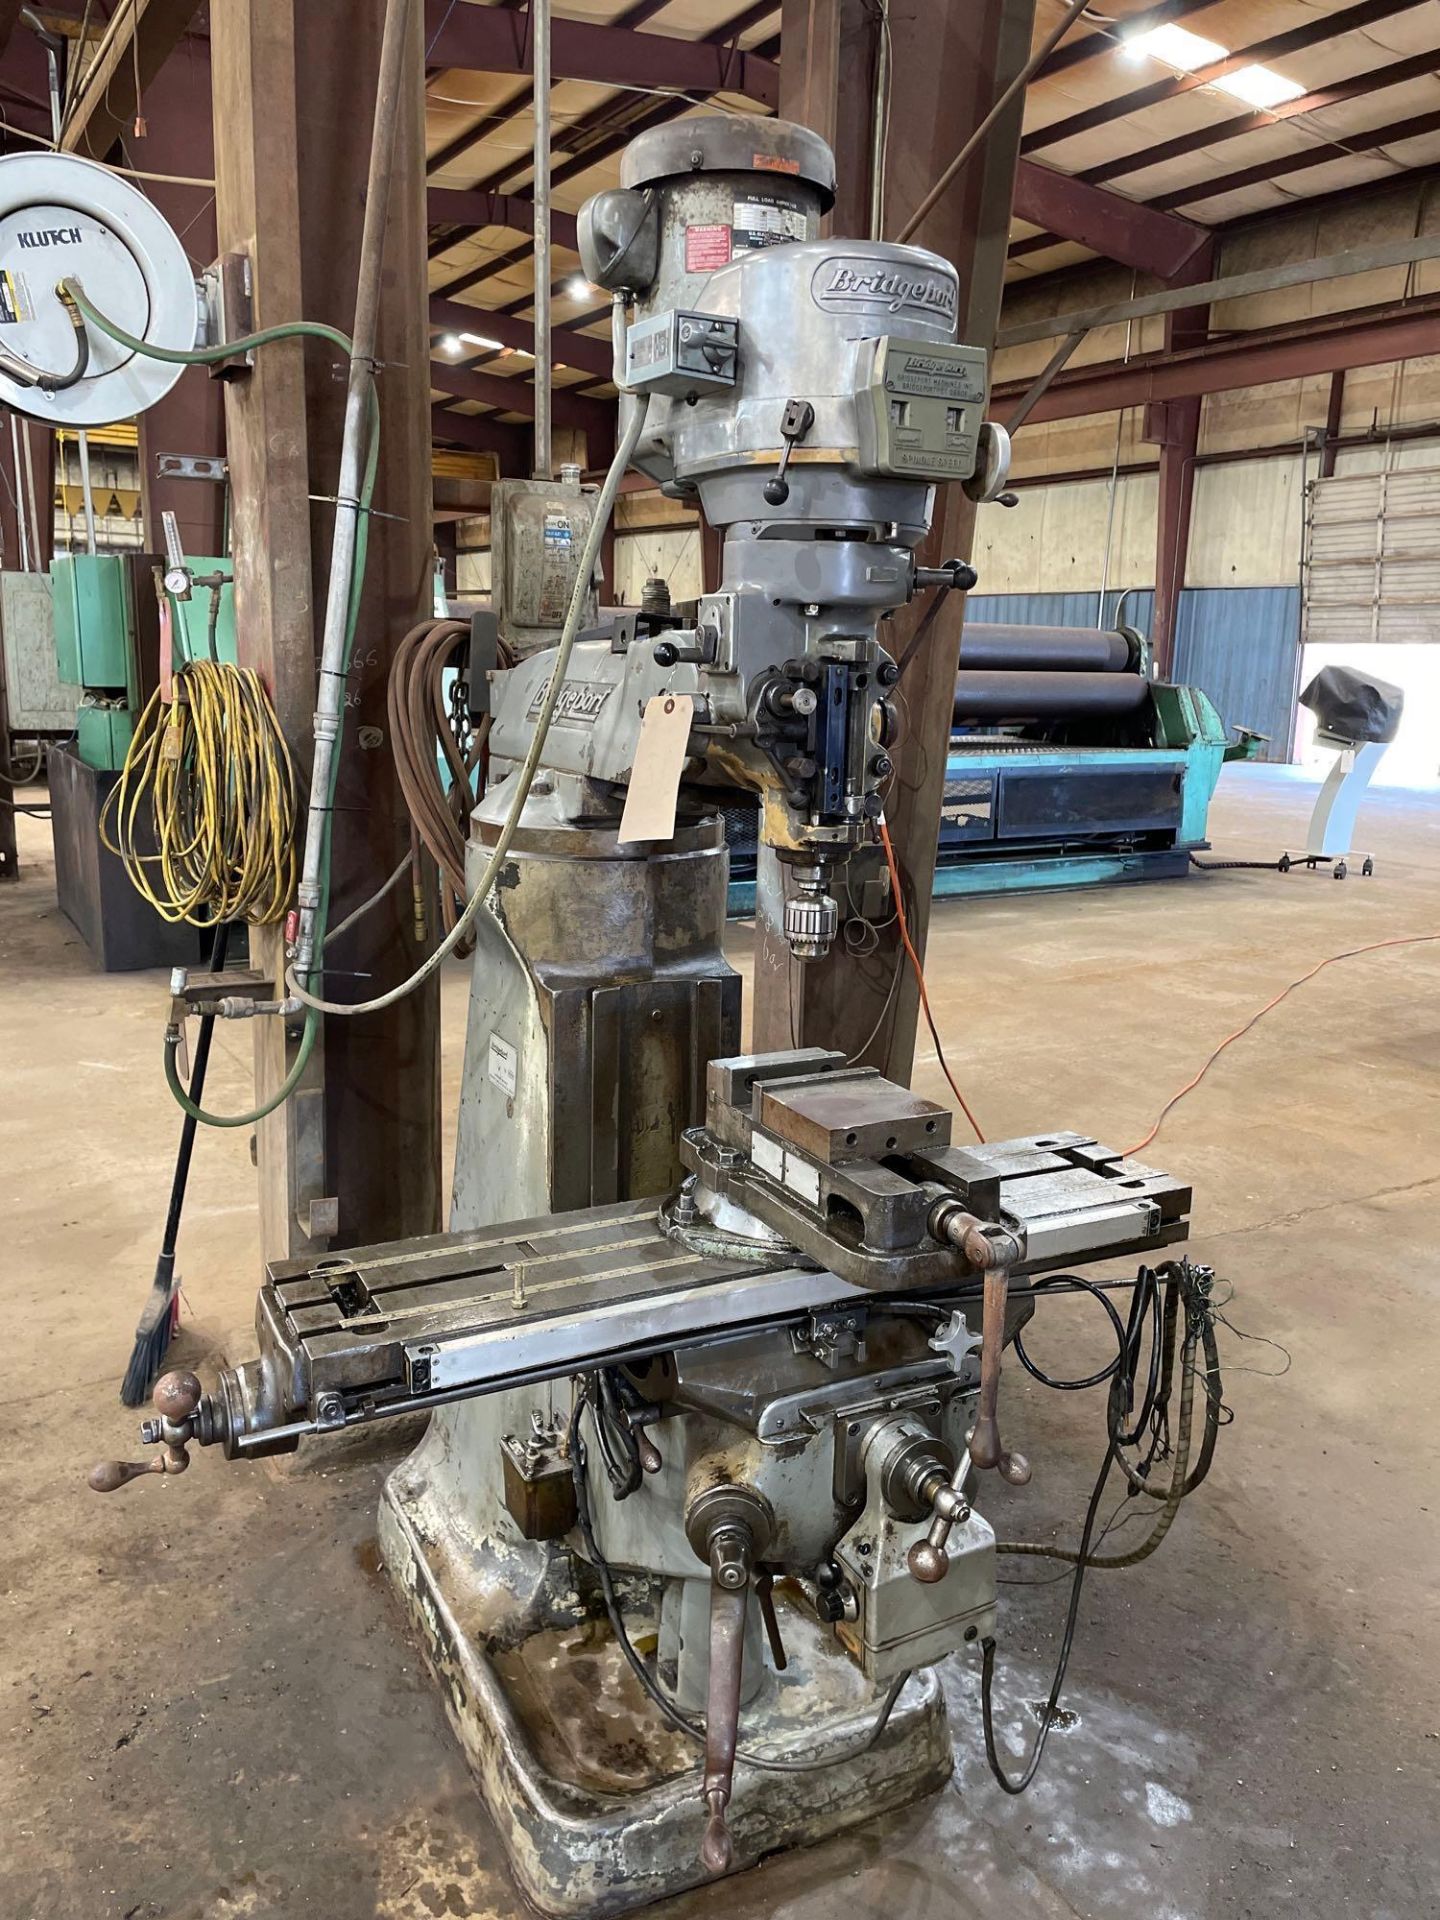 Bridgeport Vertical Mill, with 6” Vise, 40” X 9” Table,